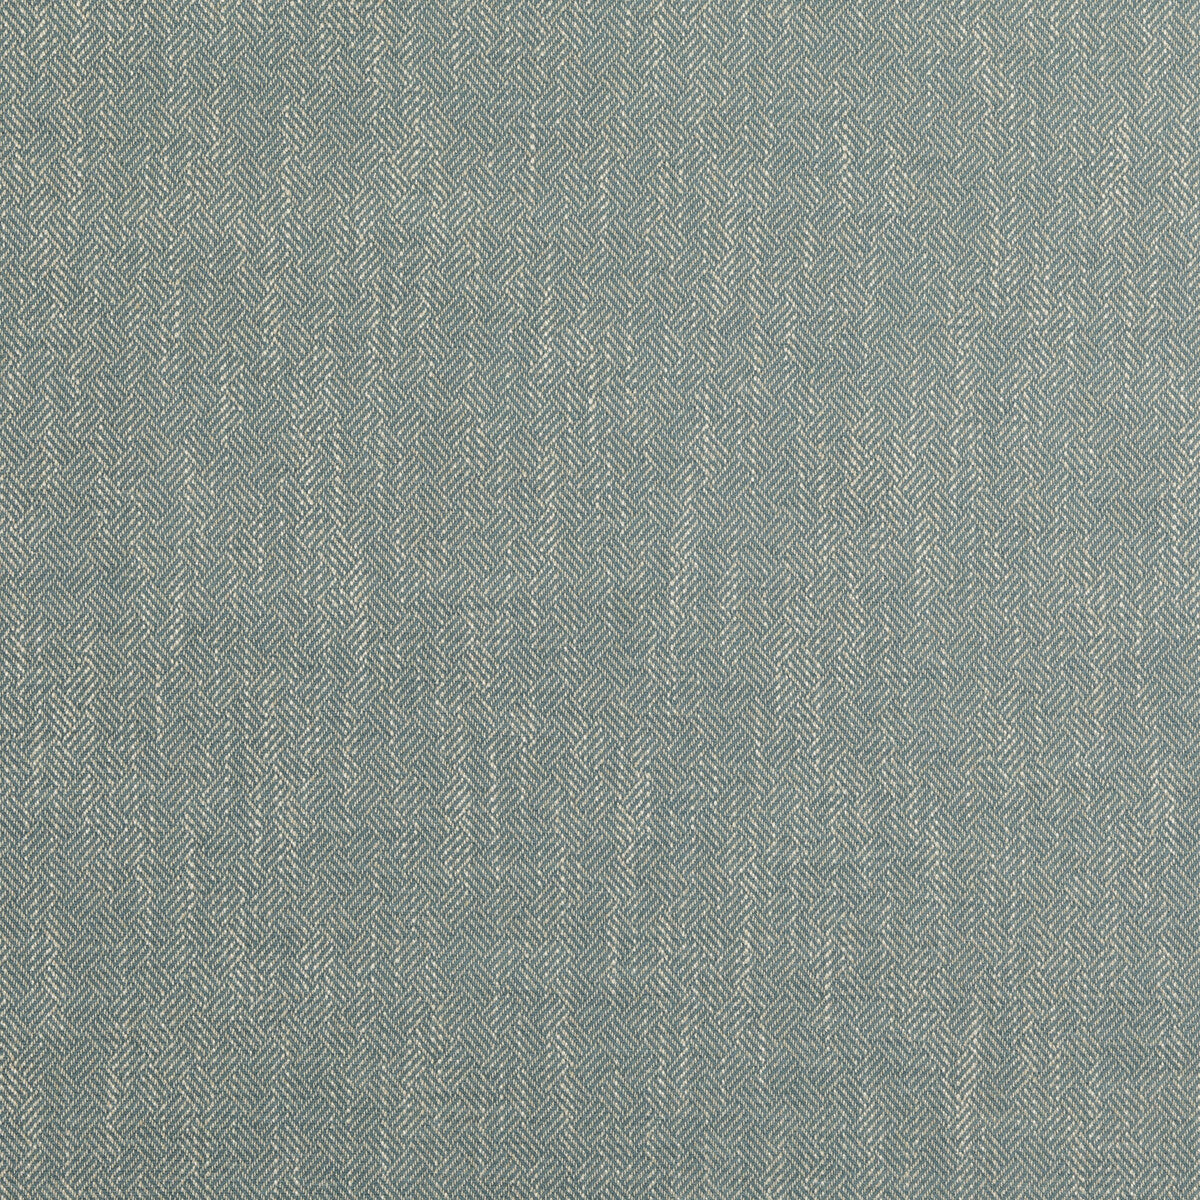 Garden Path fabric in soft blue color - pattern PF50486.605.0 - by Baker Lifestyle in the Block Weaves collection